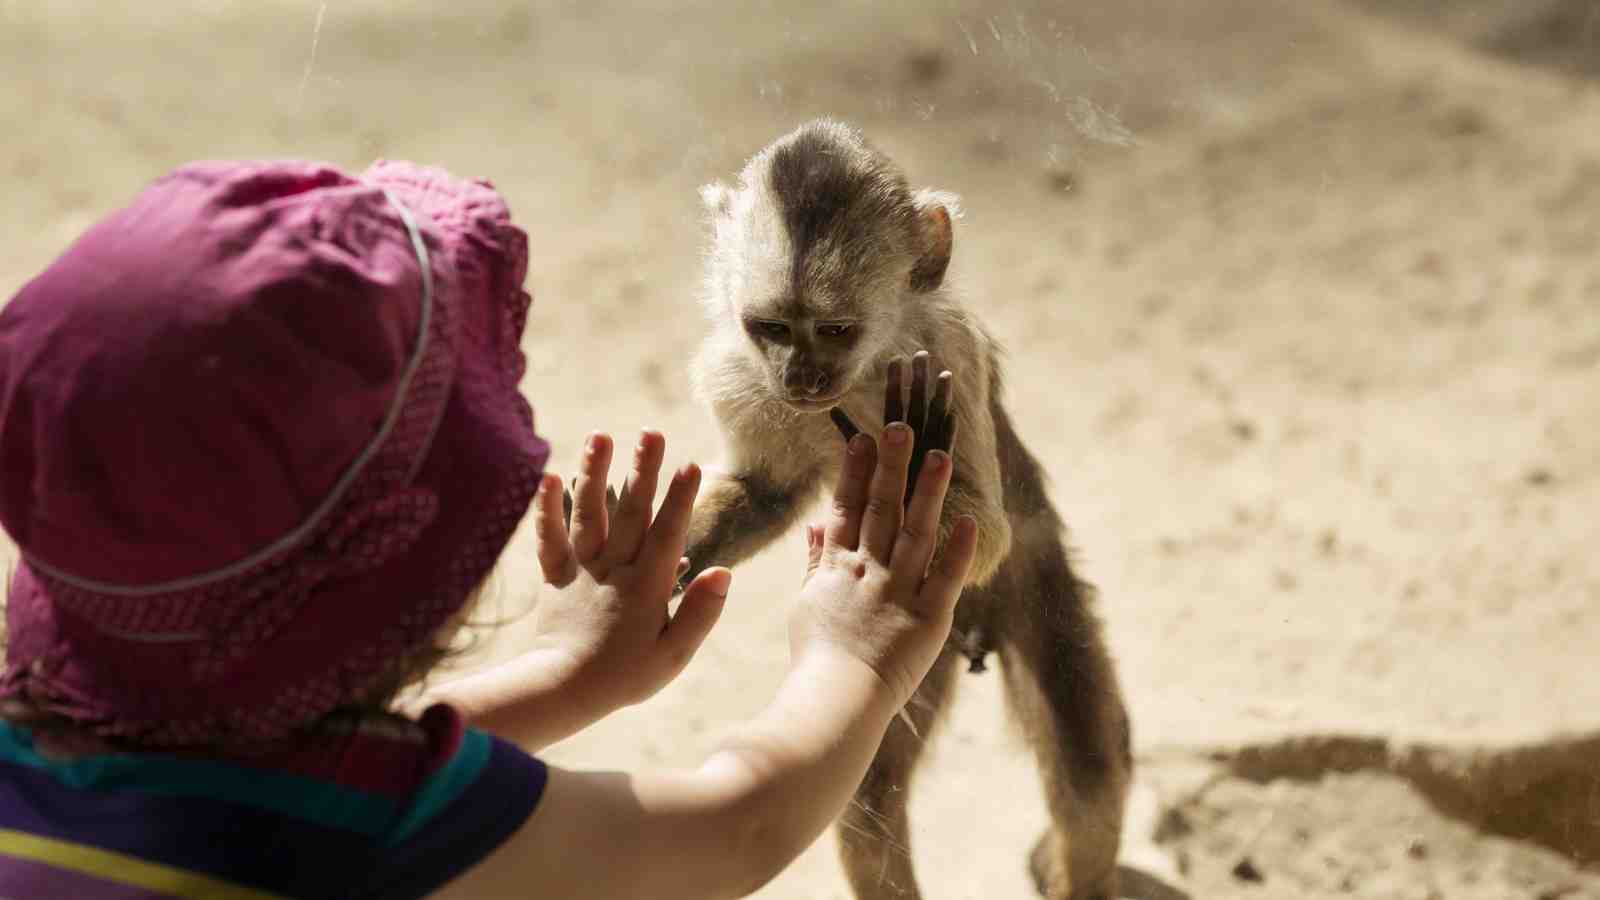 A child at a zoo holds up her hands to class and monkey on the other side does the same.